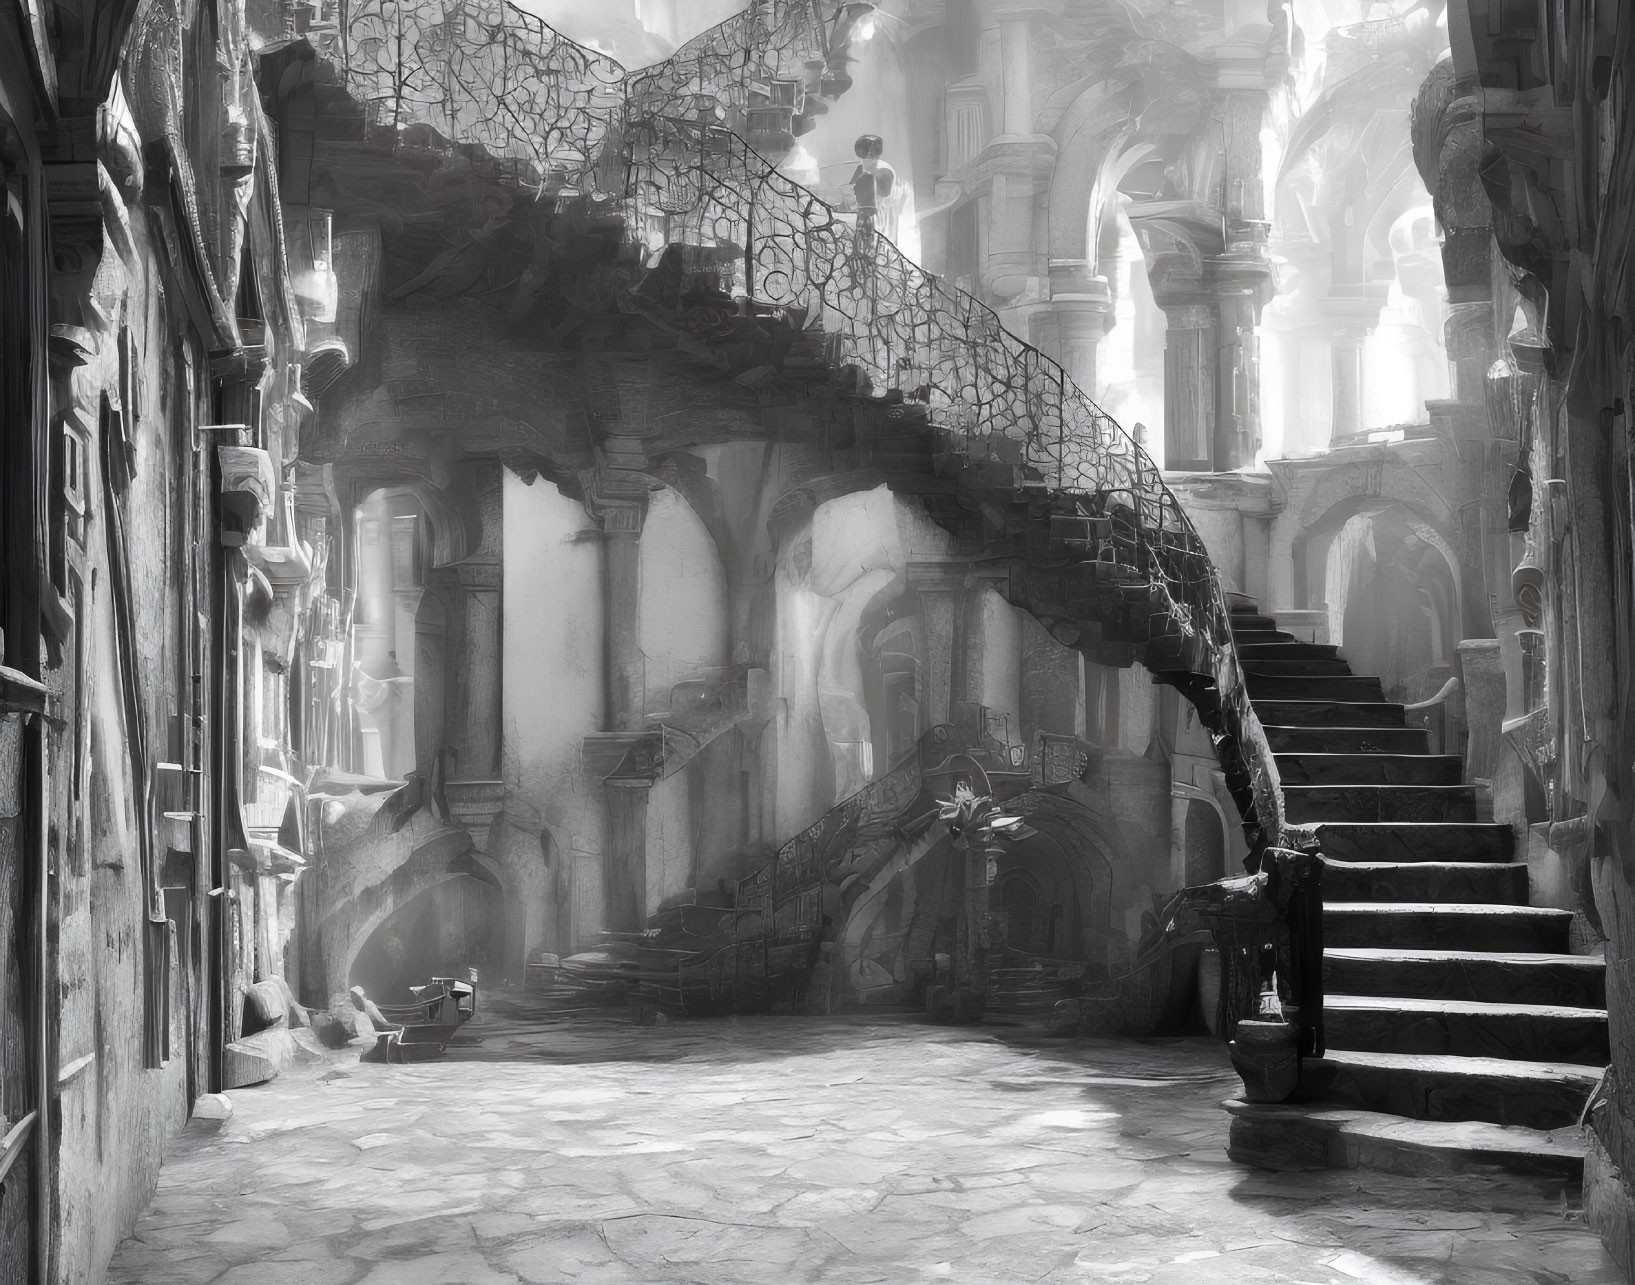 Monochrome image of ancient stone courtyard with figure on staircase